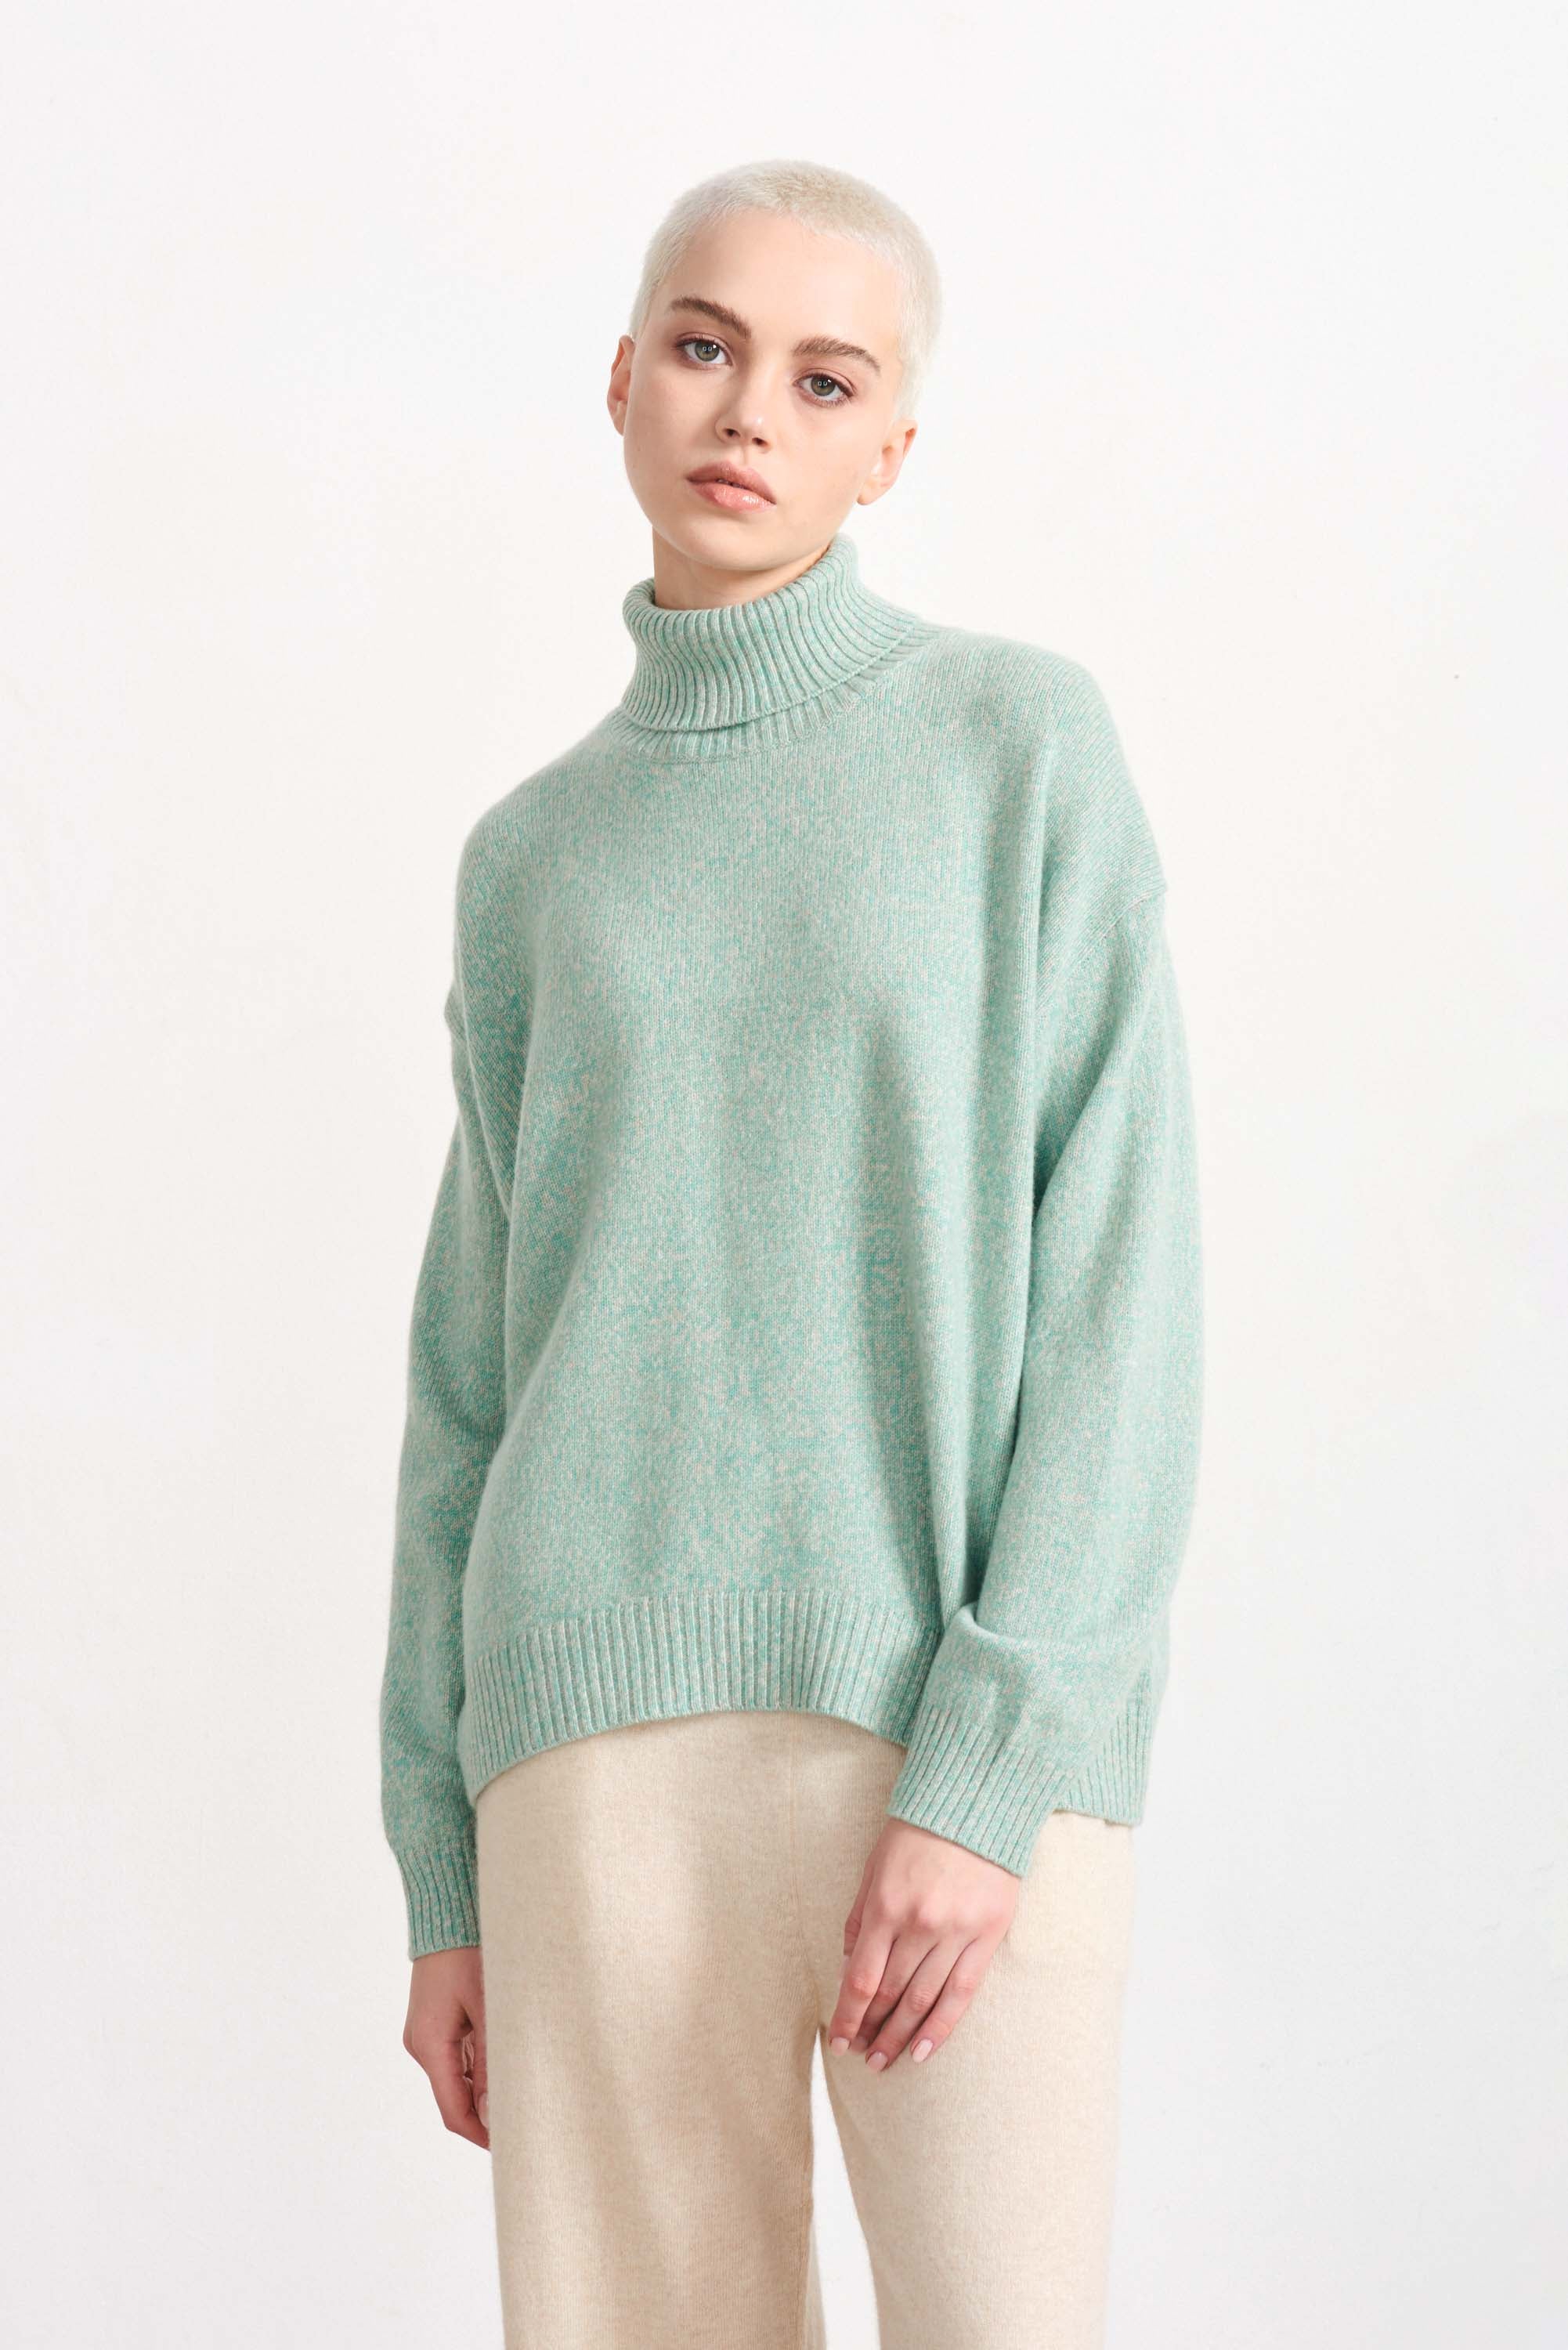 Blonde haired female model wearing Jumper 1234 cashmere and wool heavier weight oversized roll neck jumper in sage green marl